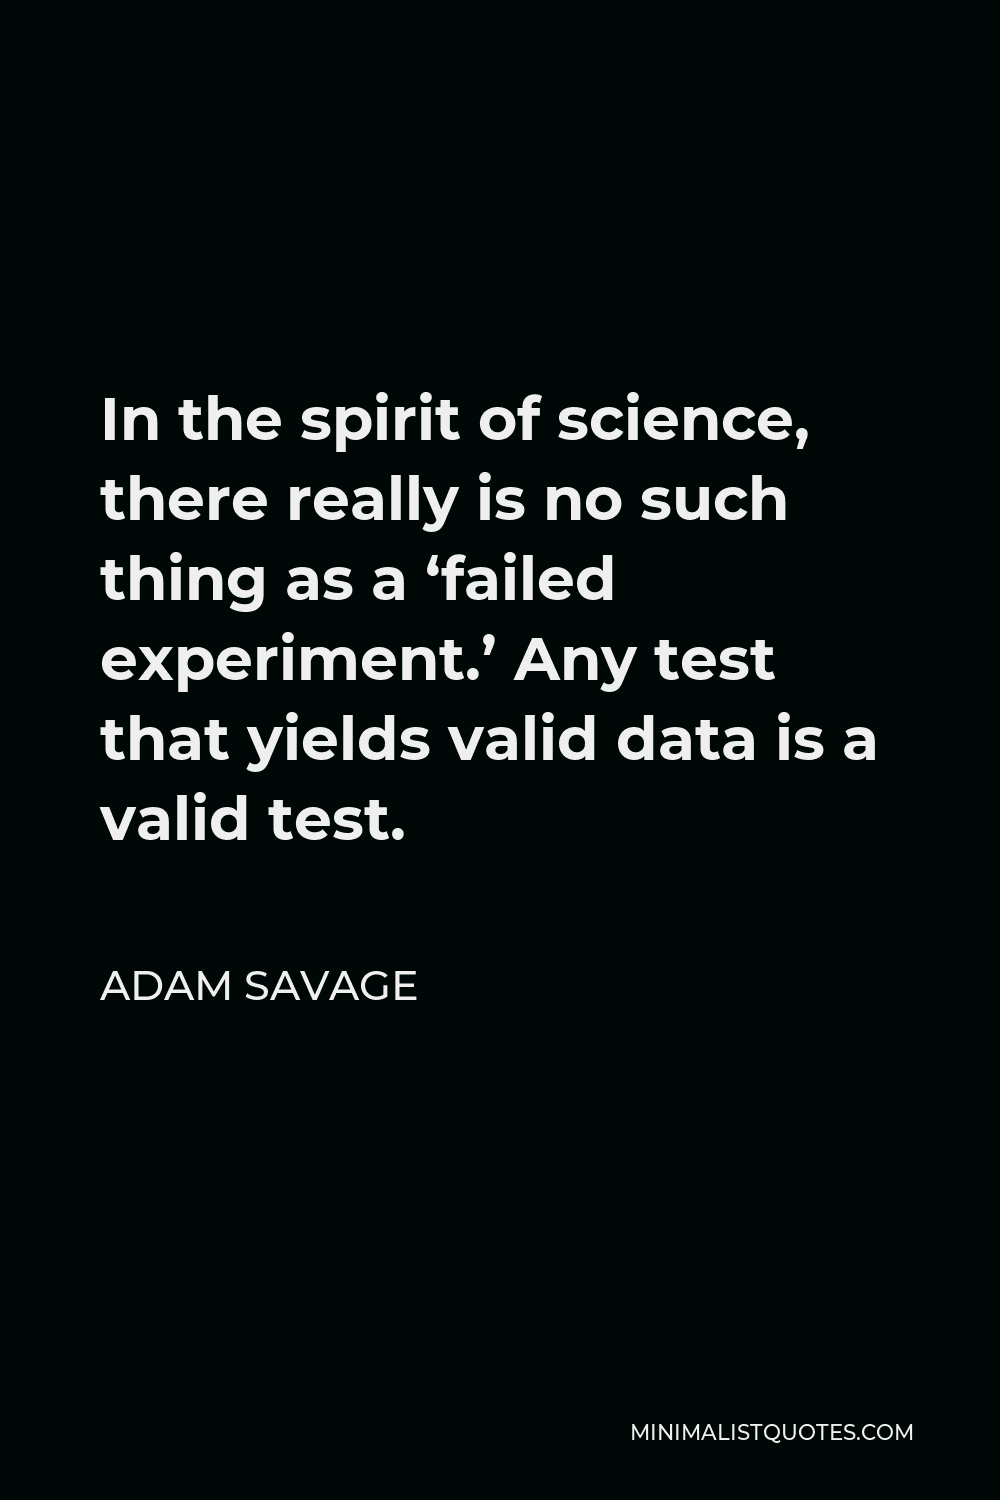 Adam Savage Quote - In the spirit of science, there really is no such thing as a ‘failed experiment.’ Any test that yields valid data is a valid test.